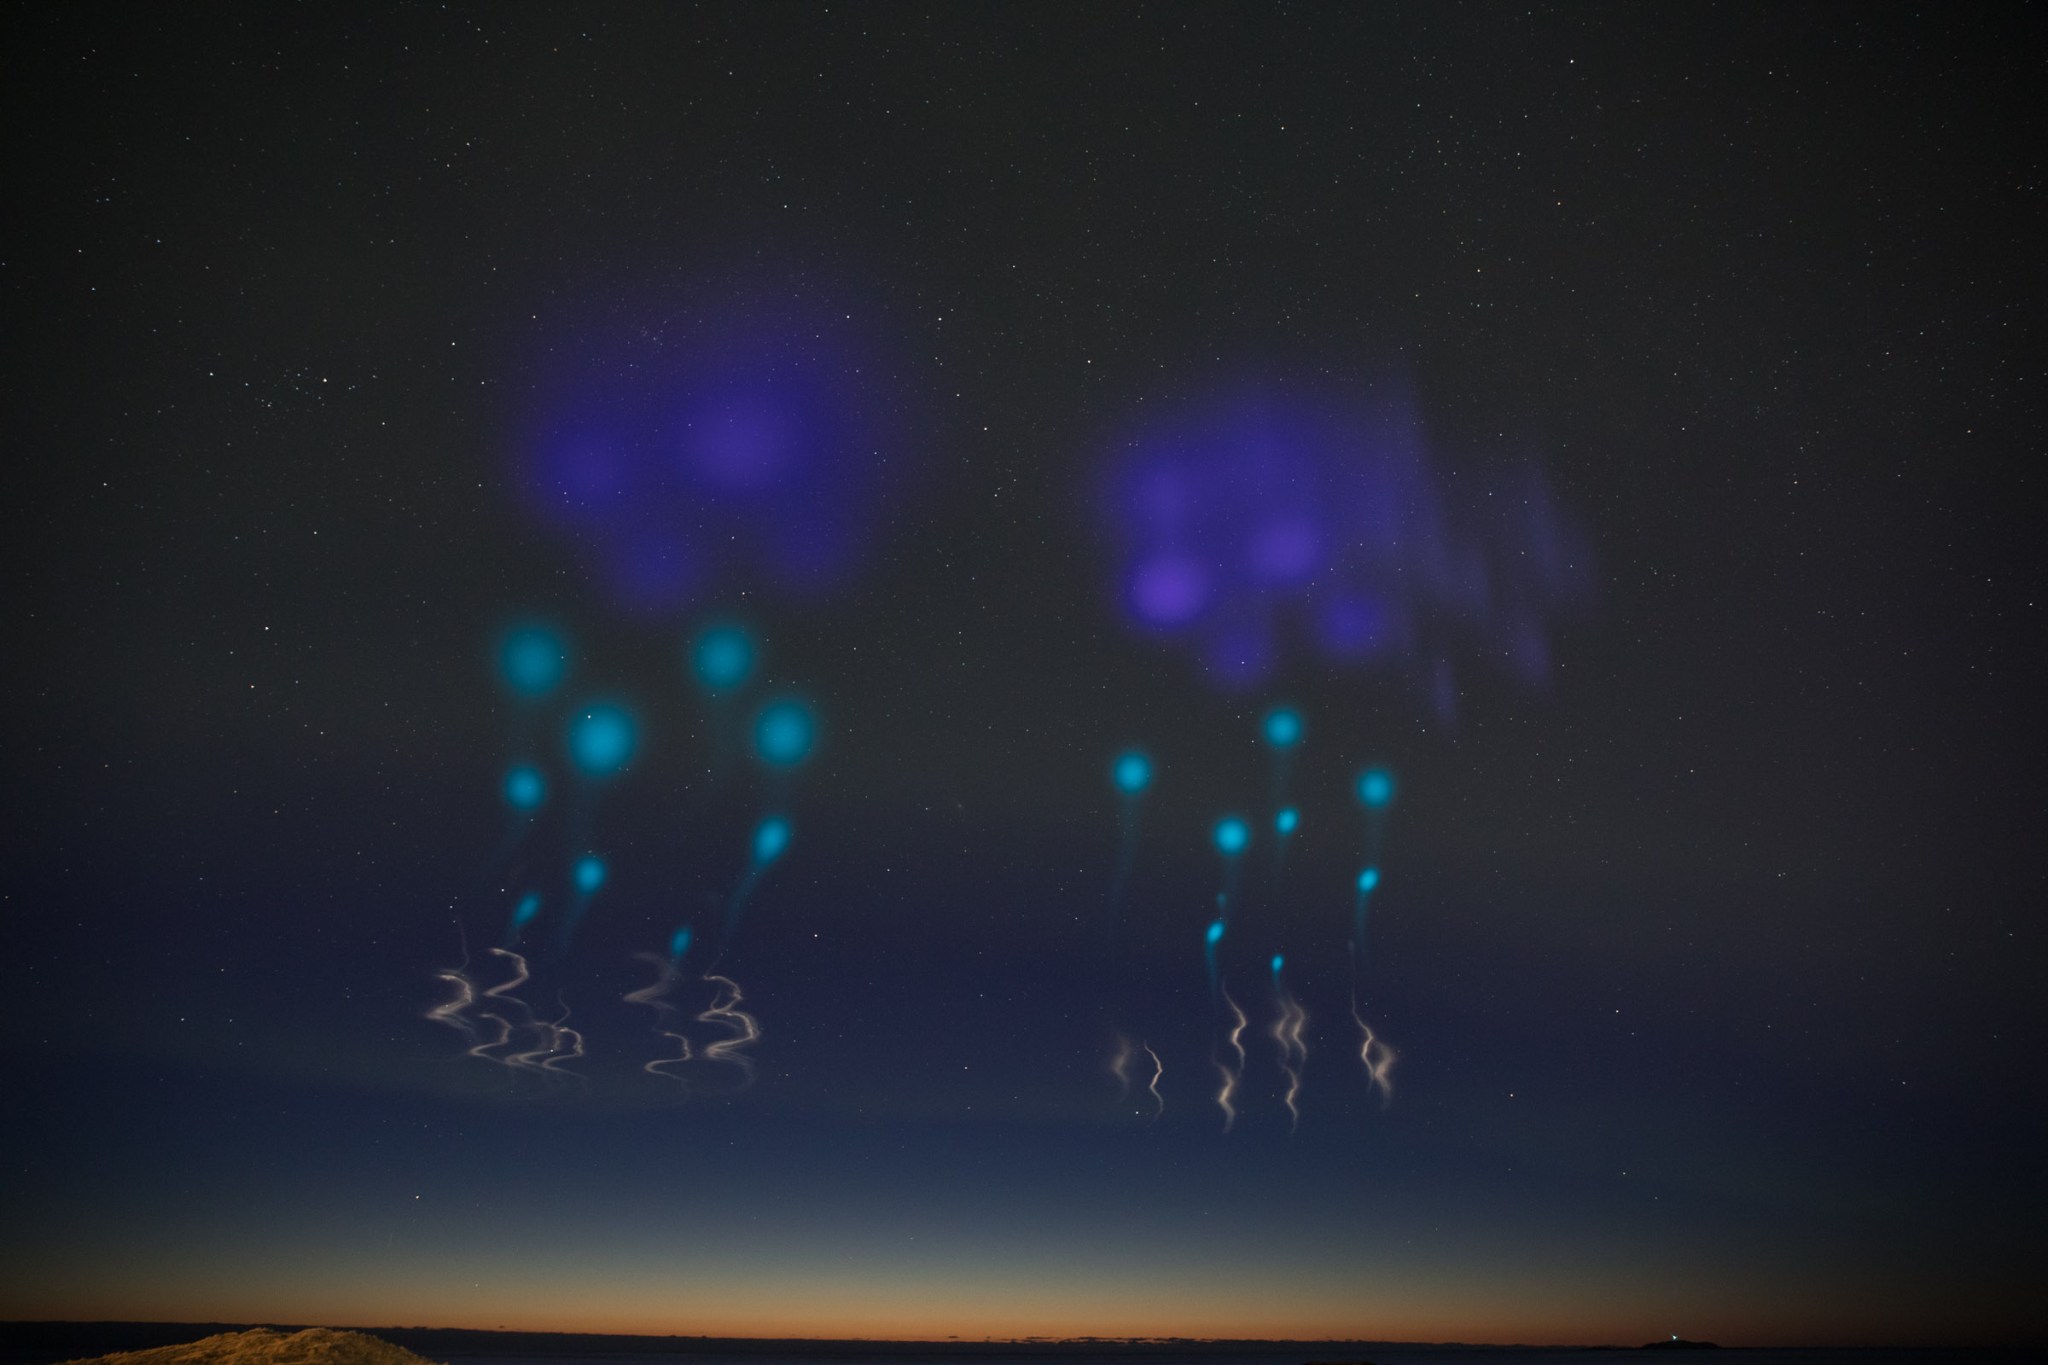 Photo of vapor tracers being released in the sky after a rocket launch. There are two sets of tracers, each has four very fuzzy deep purple spots on top. Below that are four more light blue fuzzy dots with small faded trails leading down under them, with about 3-4 smaller blue trails. Below all of that is very light orange squiggly trails leading below. The sky is clear with many small, white stars in the background, fading down into a light orange along the horizon